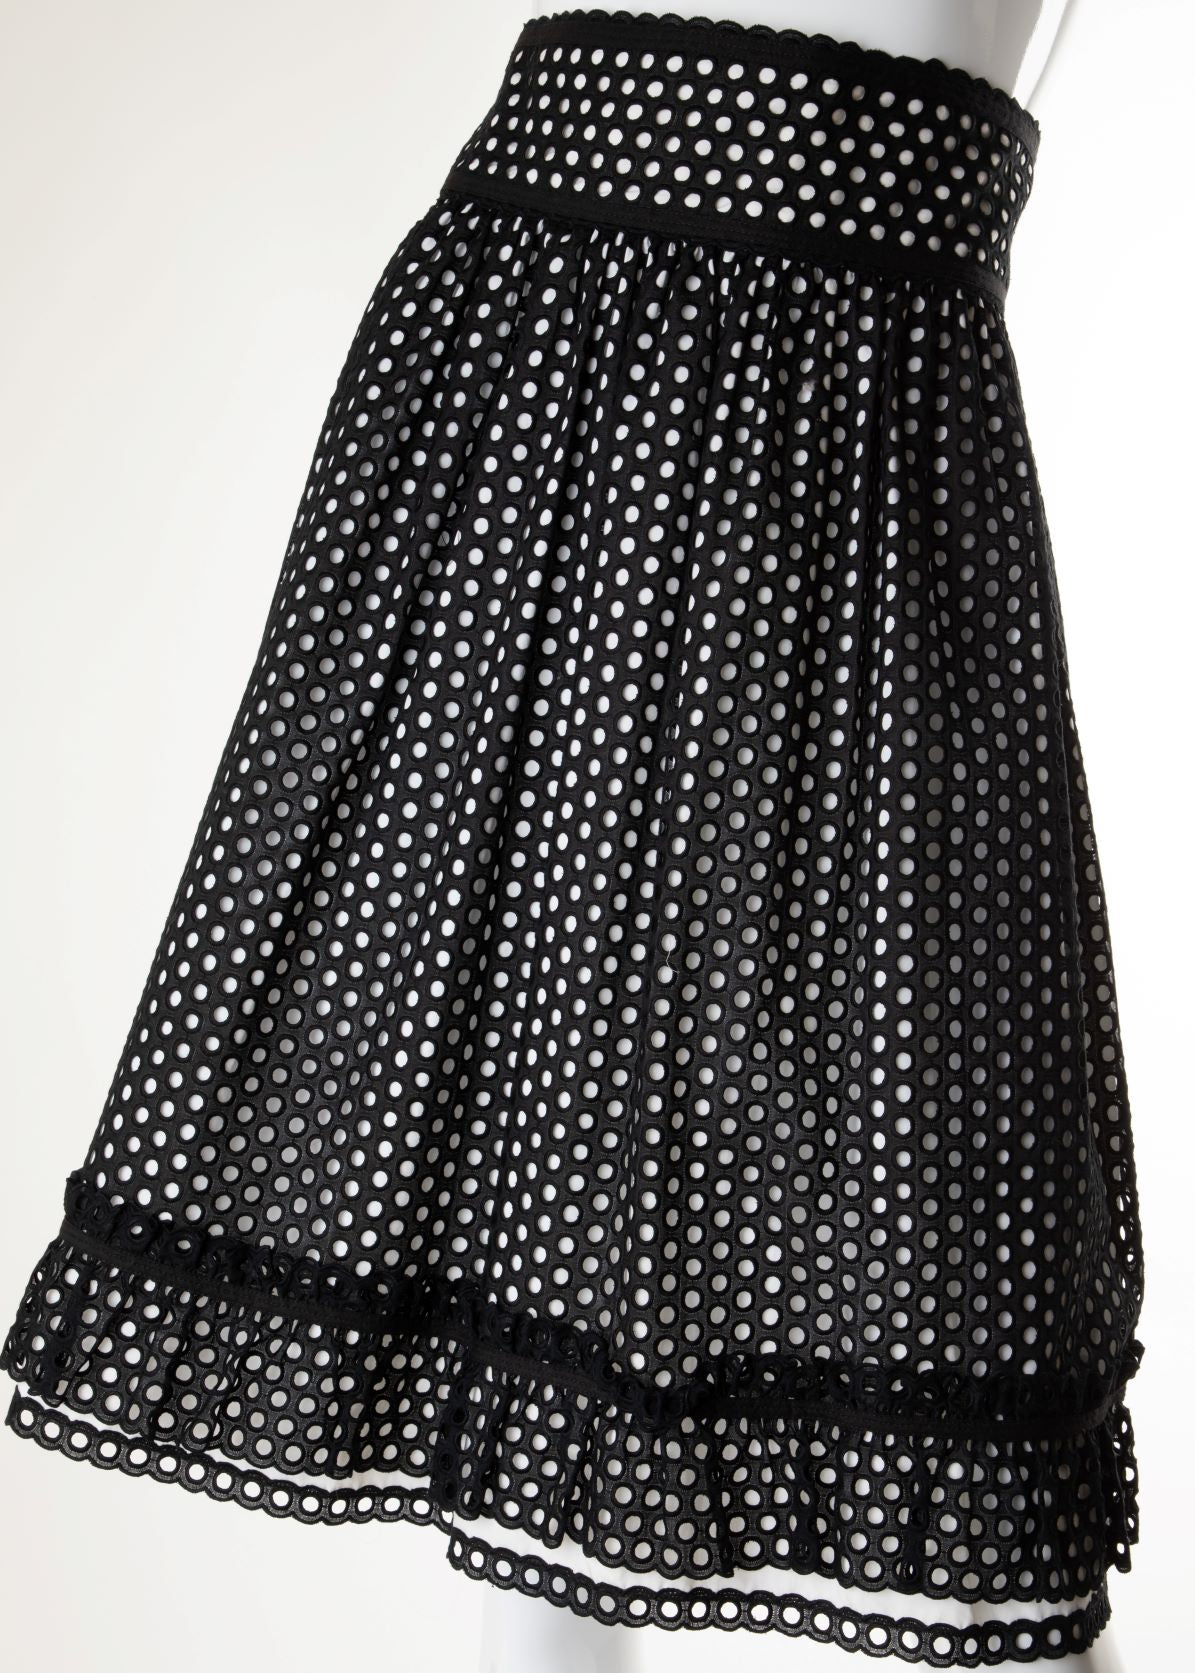 Marc Jacobs - Eyelet Skirt with Ruffle Bottom